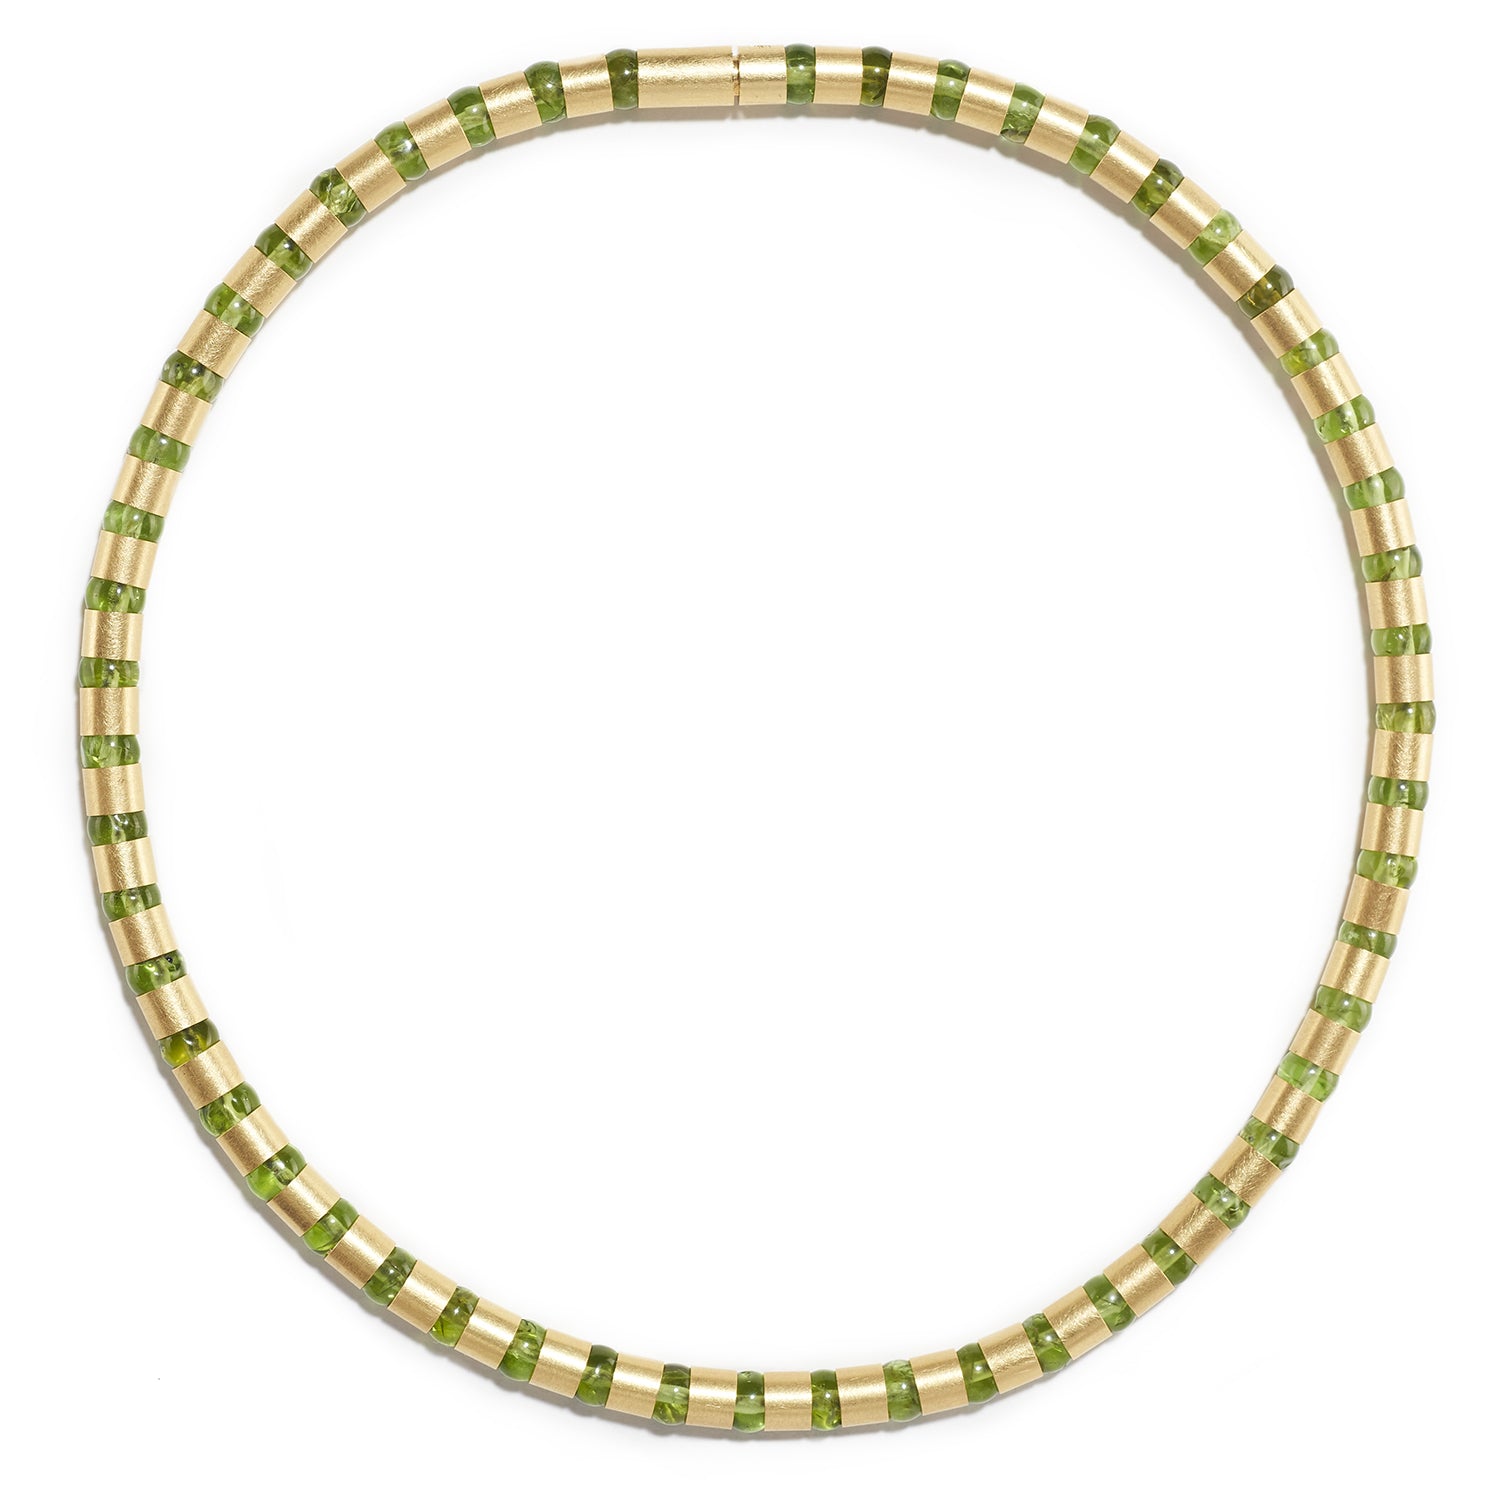 Cleopatra Gold Collier~6mm Peridot